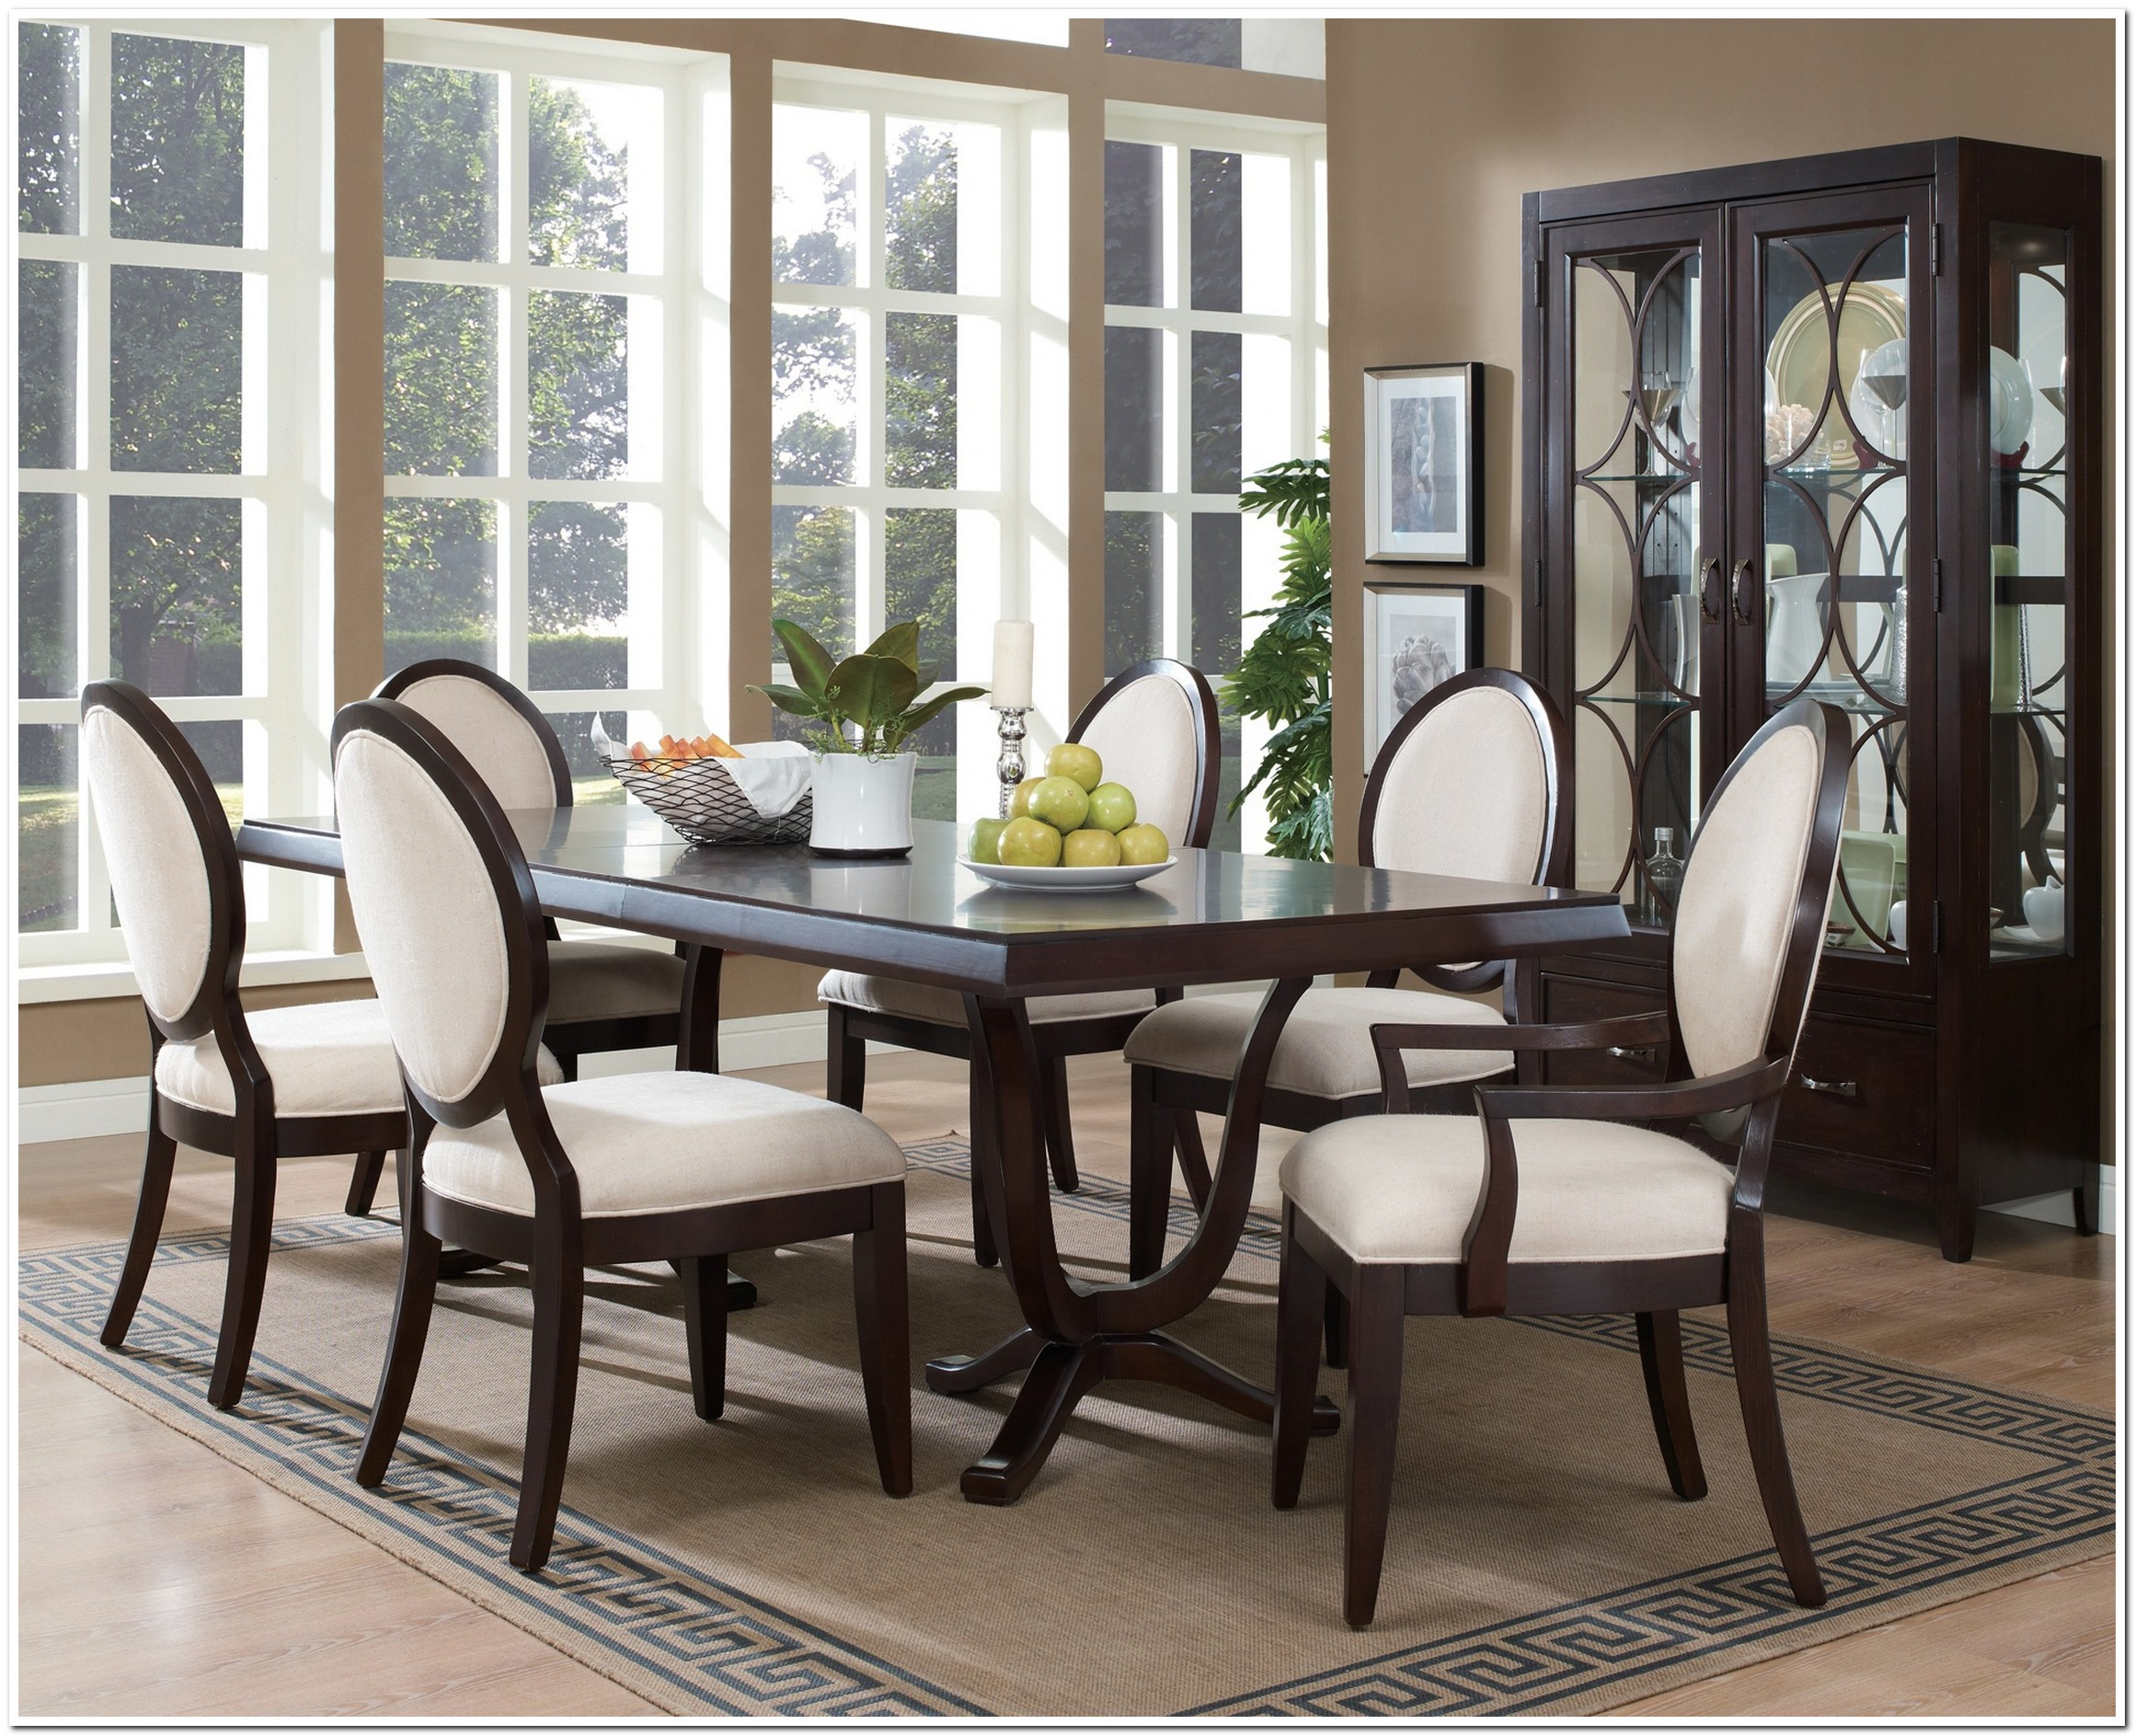 french european dining room sets